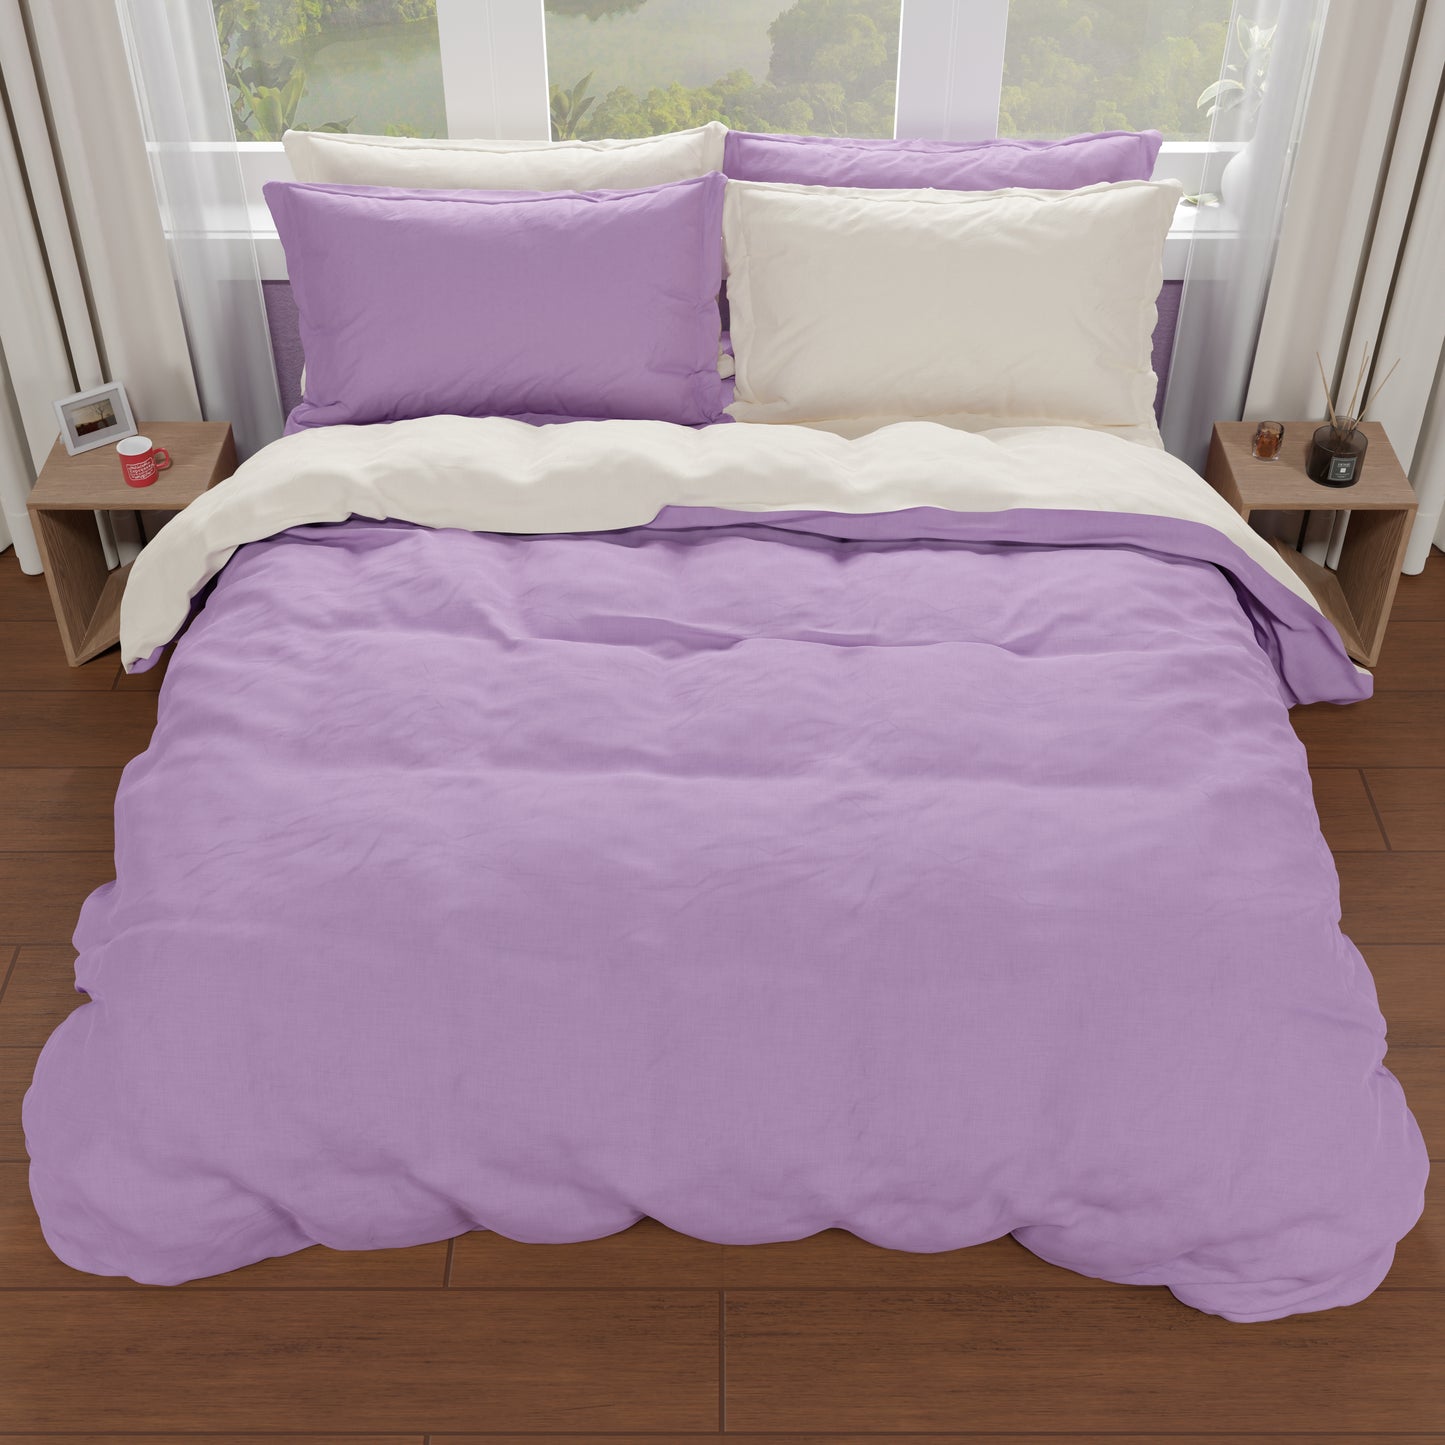 Double Duvet Cover, Duvet Cover and Pillowcases, Lilac/Cream